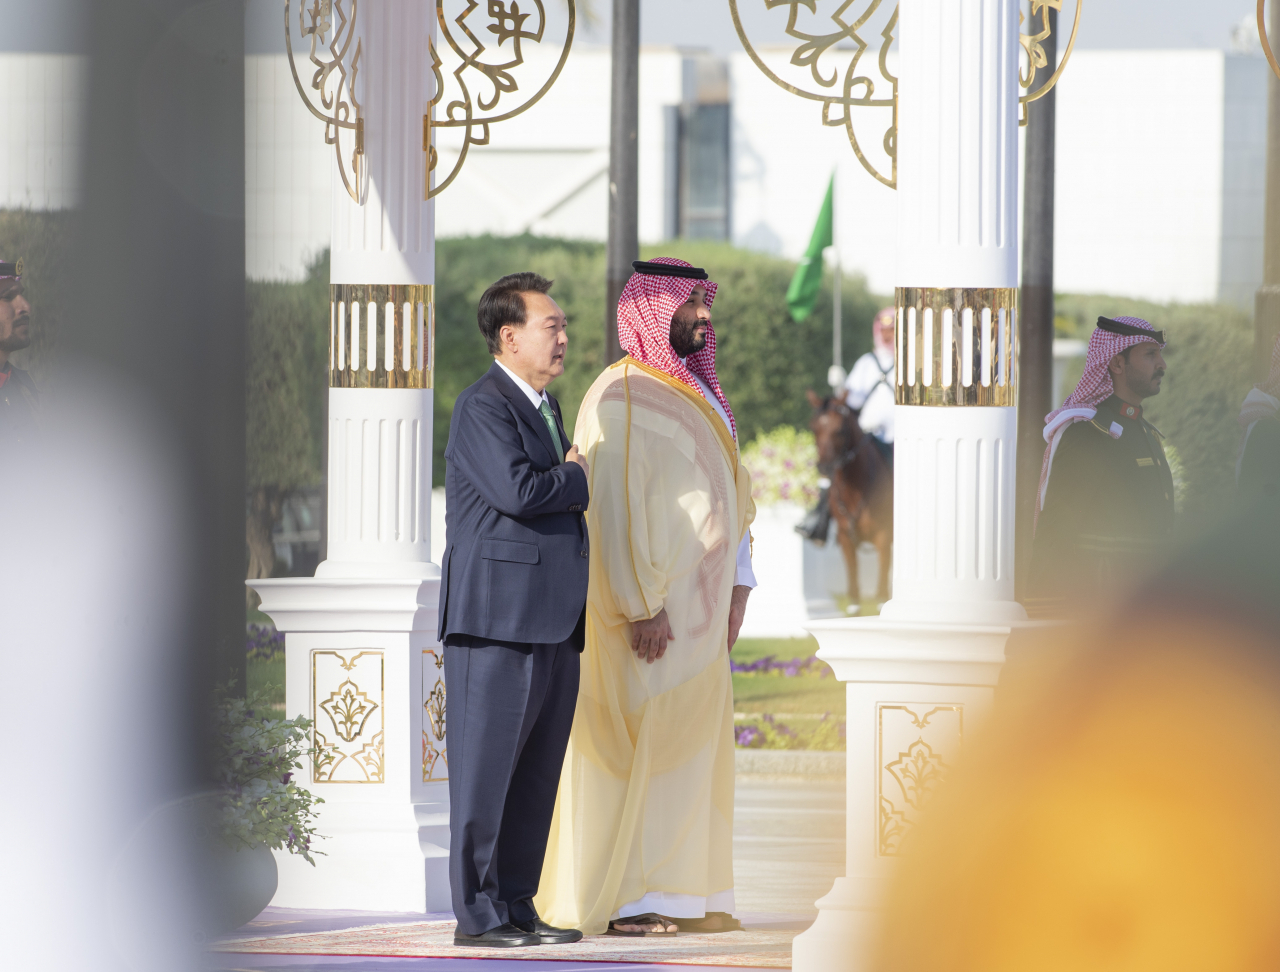 President Yoon Suk Yeol, who is on a state visit to Saudi Arabia, salutes the South Korean national flag with Crown Prince Mohammed bin Salman at the official welcoming ceremony held at Al Yamamah Palace in Riyadh on Sunday. (Yonhap)